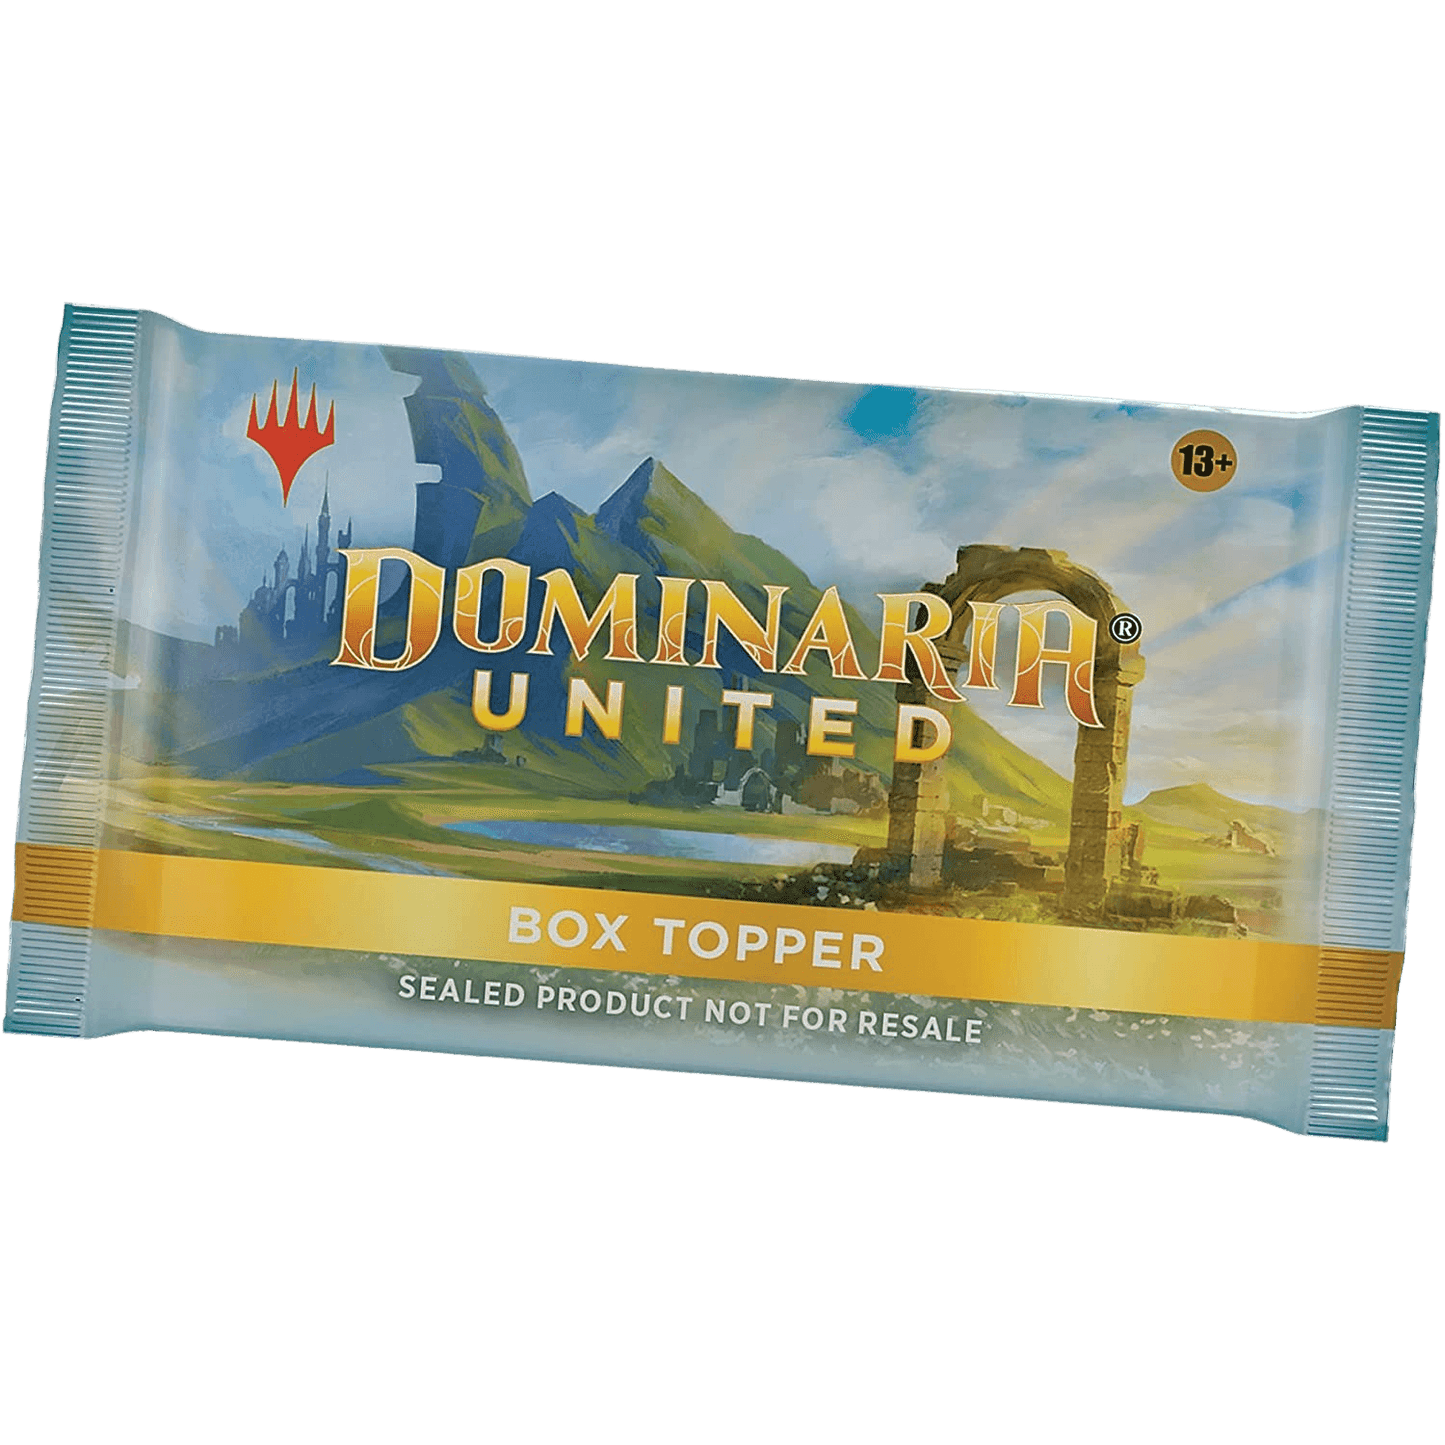 Magic: The Gathering - Dominaria United Collector Booster Box (12 Packs)